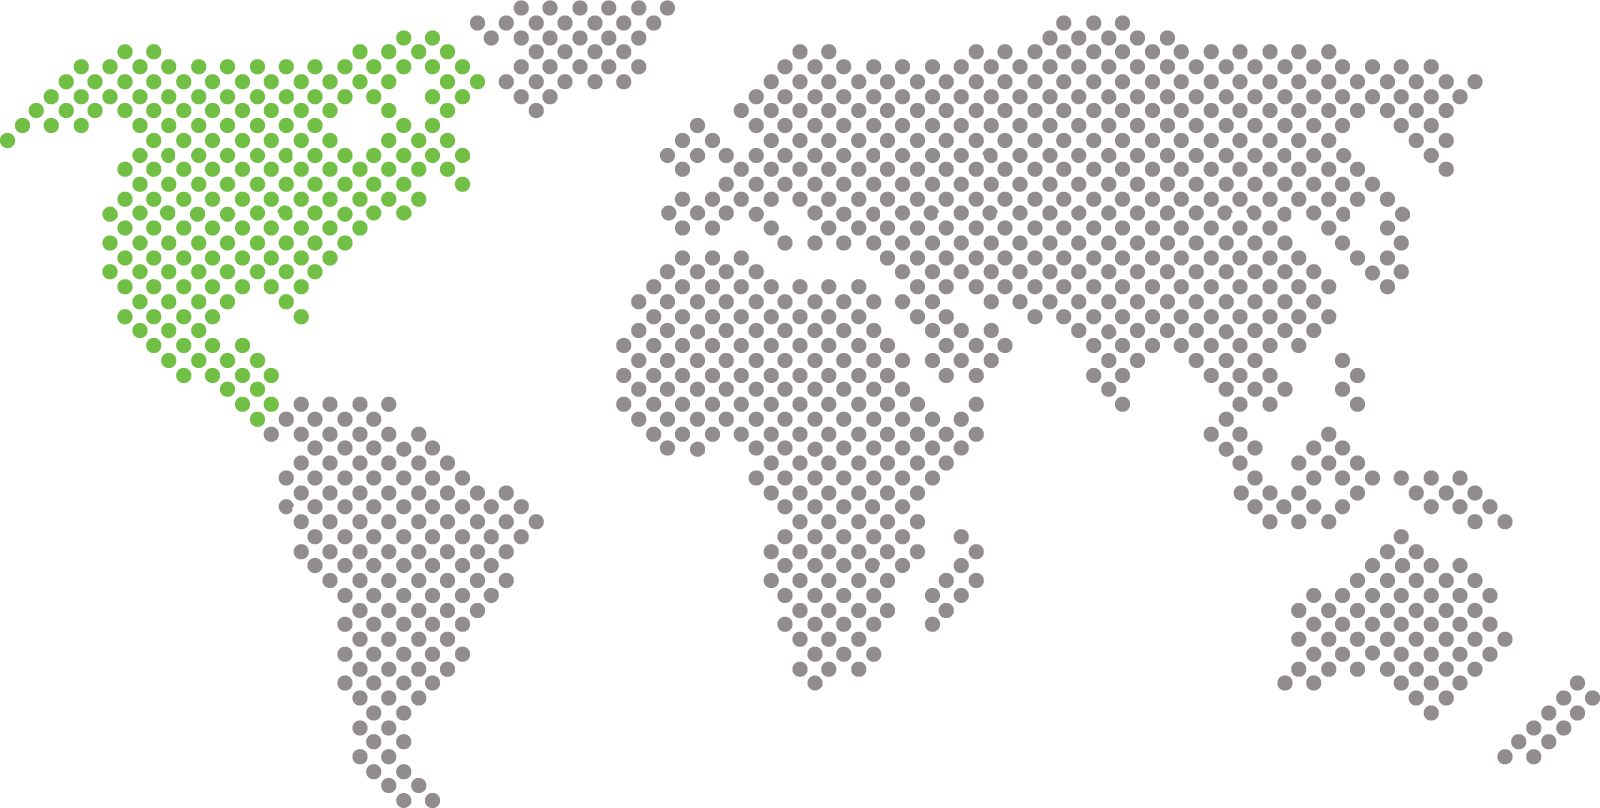 World map, with US in green